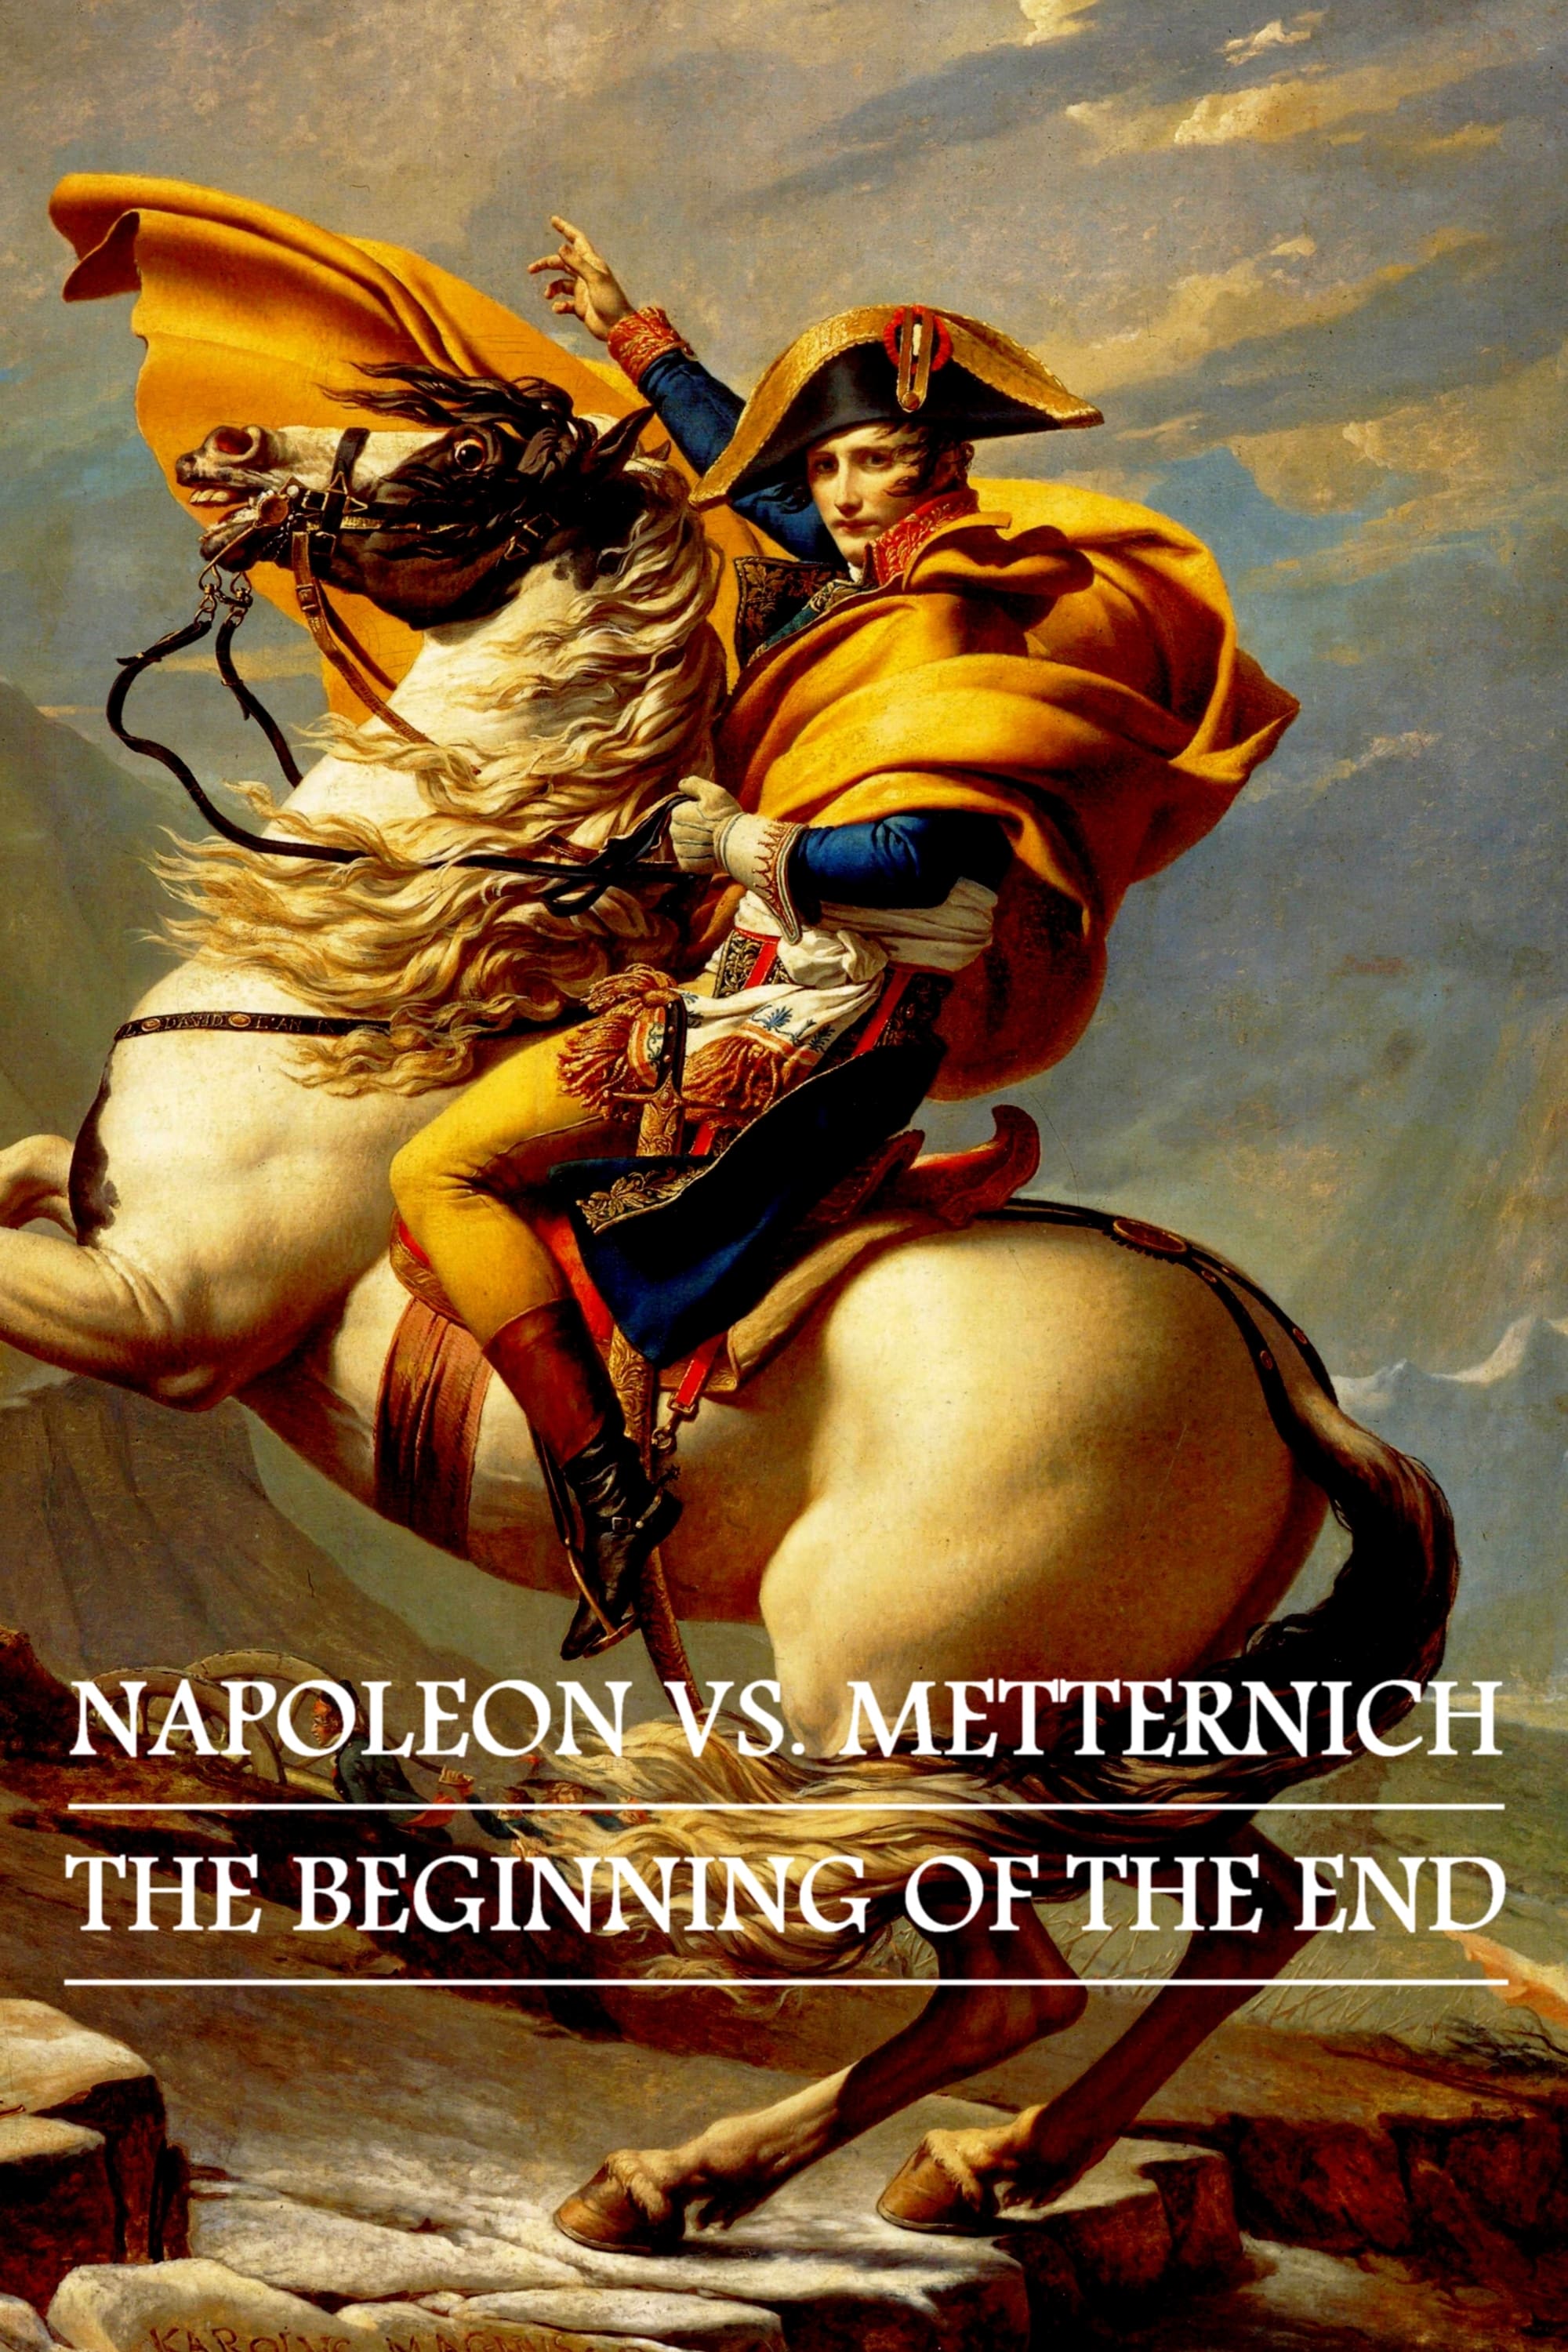 Napoleon vs. Metternich - The Beginning of the End (2021)